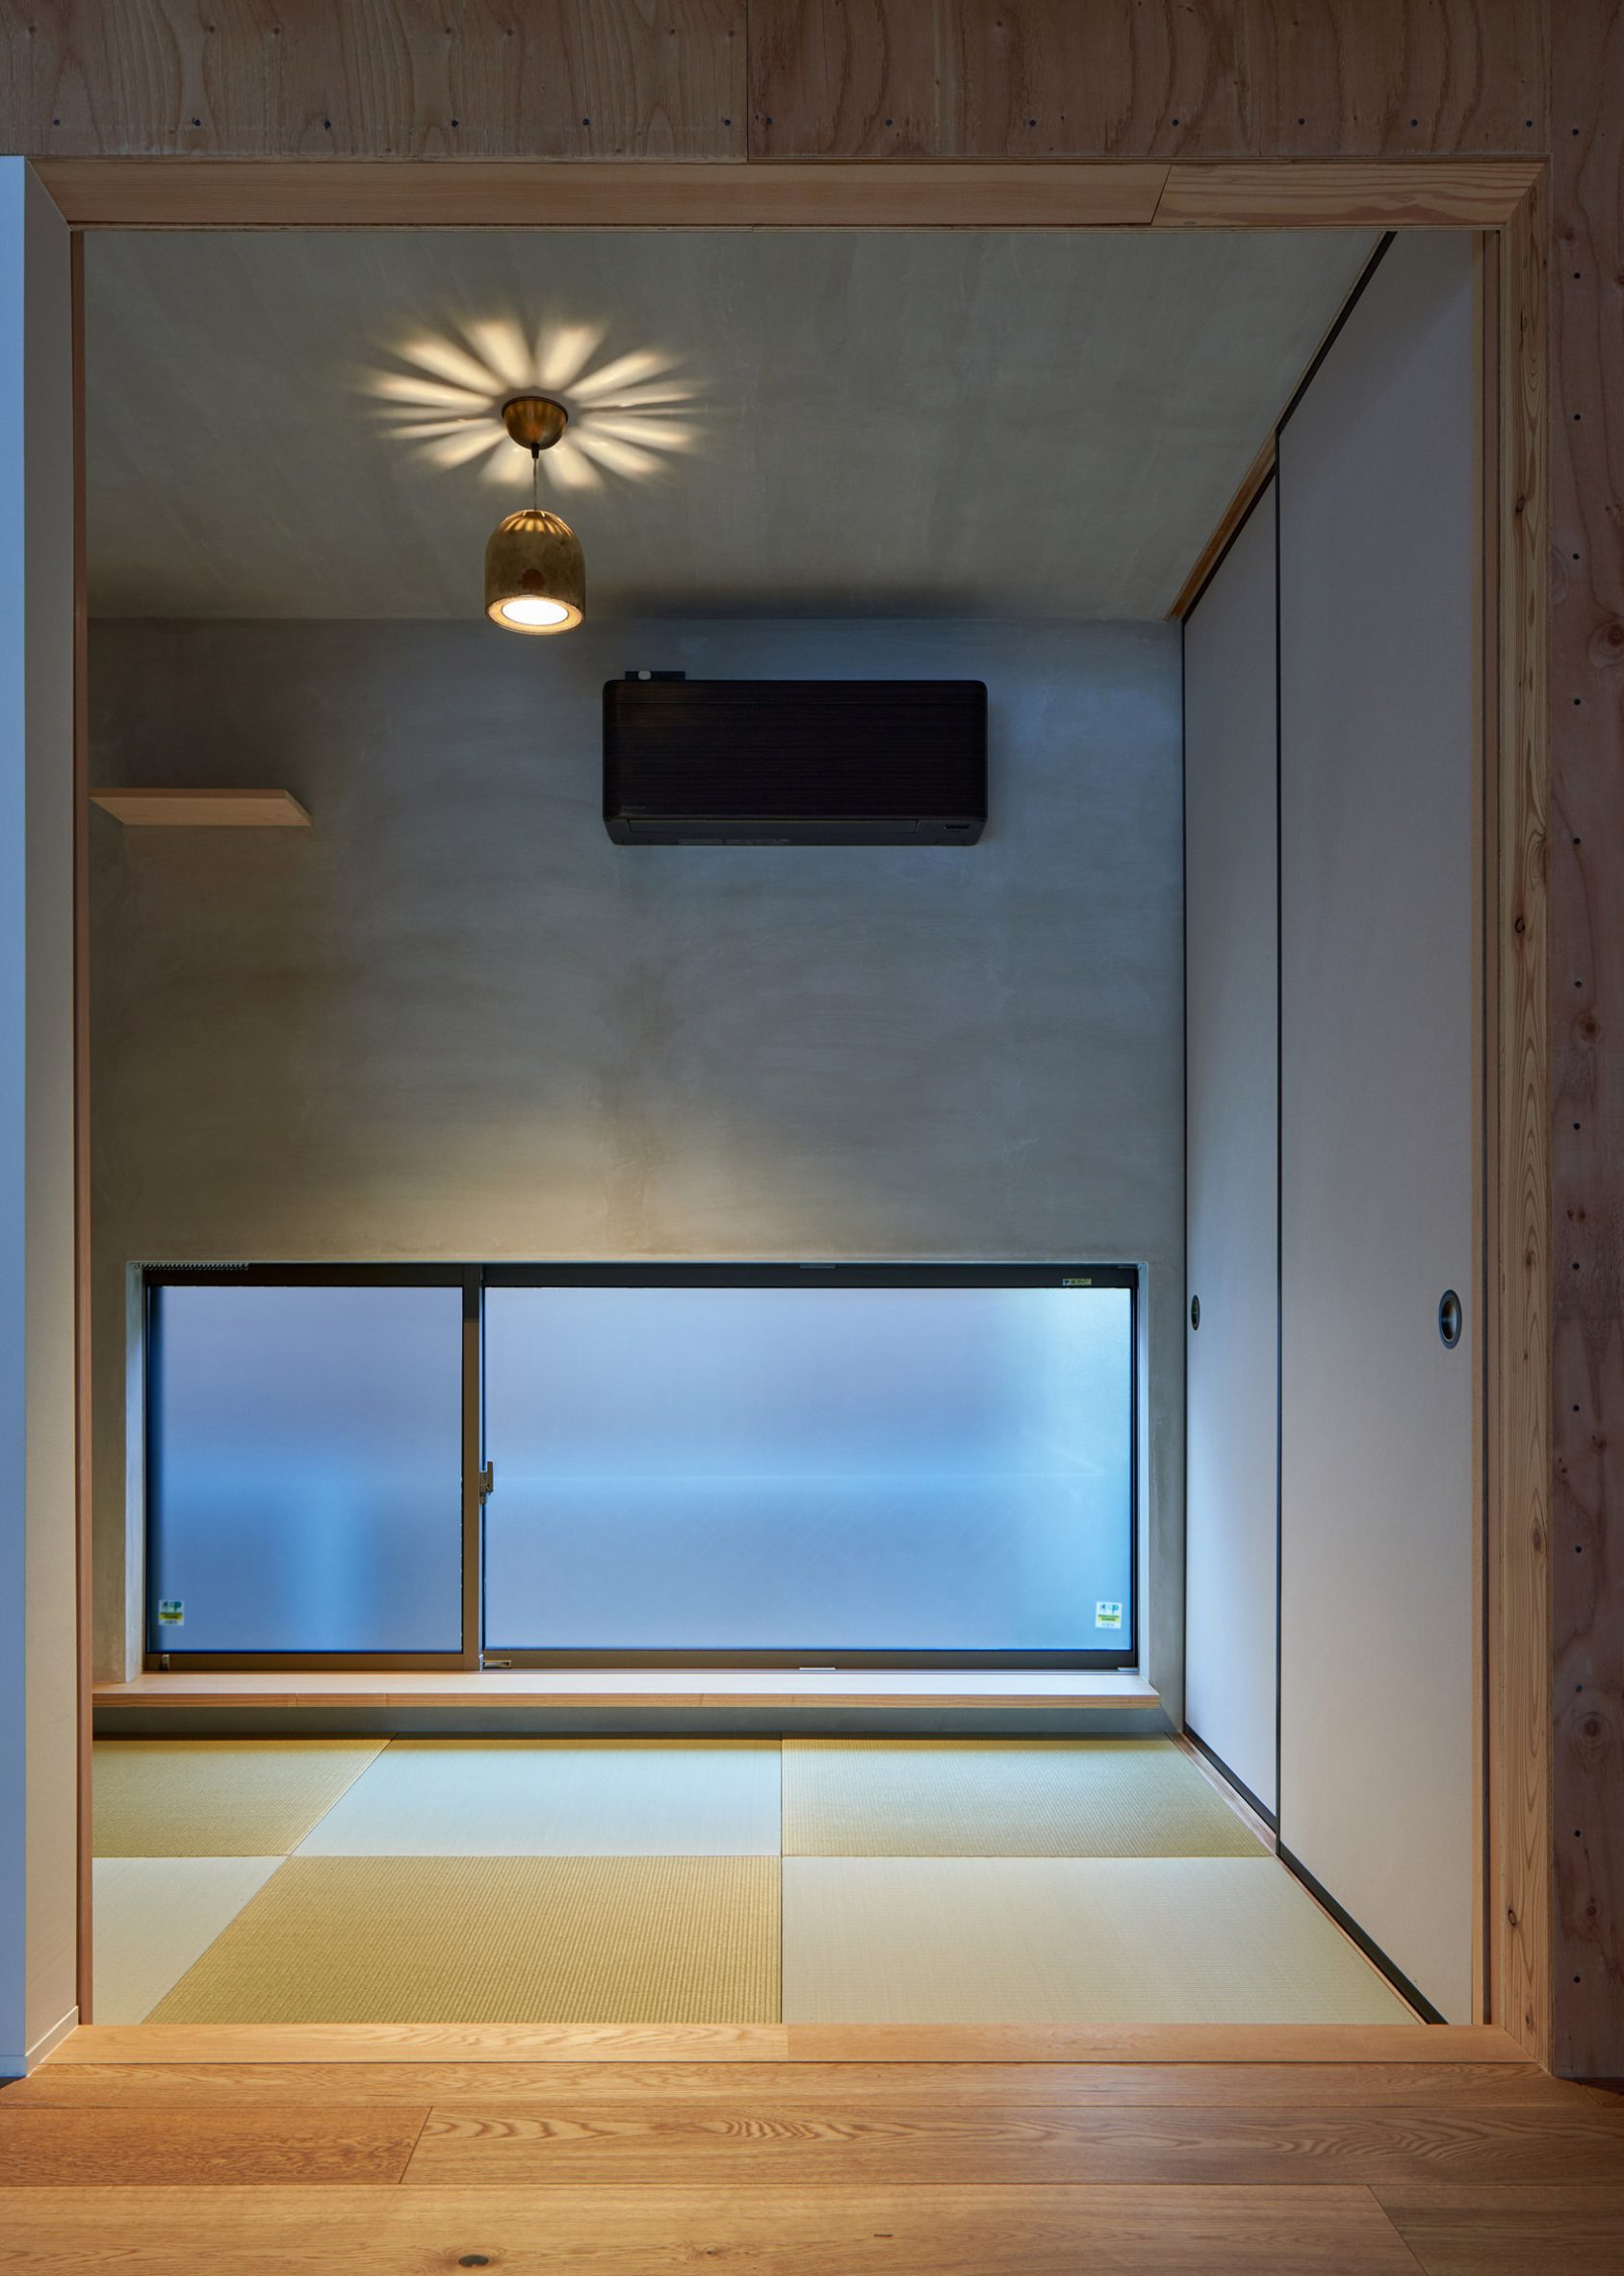 A traditional Japanese-style room with tatami flooring